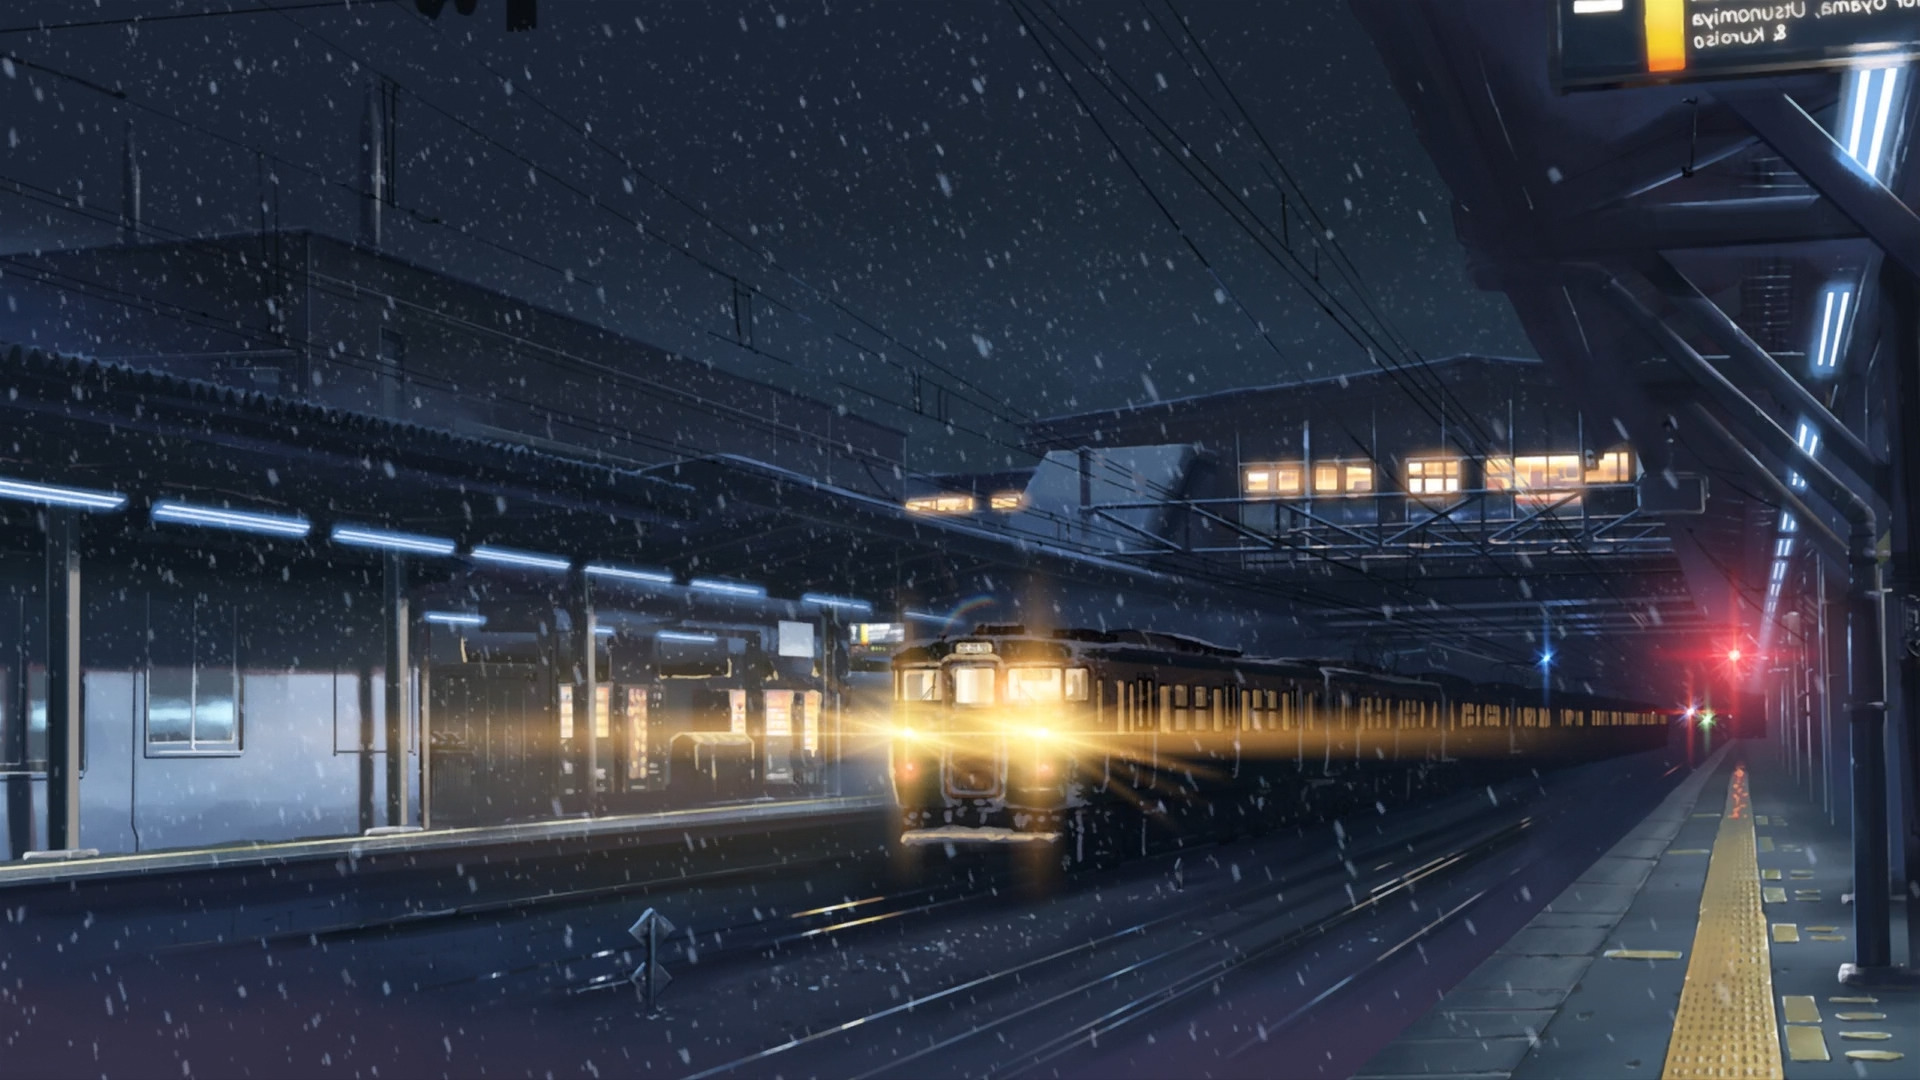 Anime Winter Lights Train Station Train Snow Night 5 Centimeters Per Second Makoto Shinkai Wallpapers Hd Desktop And Mobile Backgrounds You can also upload and share your favorite anime night wallpapers. anime winter lights train station